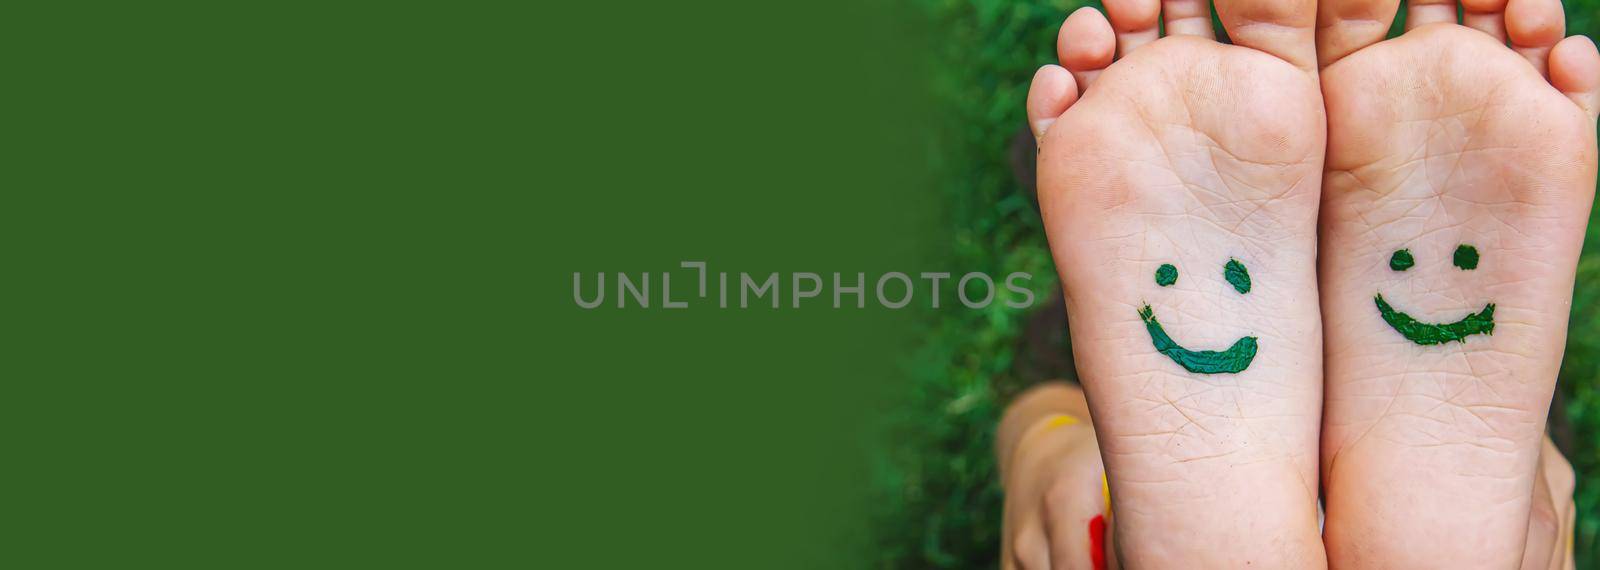 Children's feet with a pattern of paints smile on the green grass. Selective focus. by mila1784